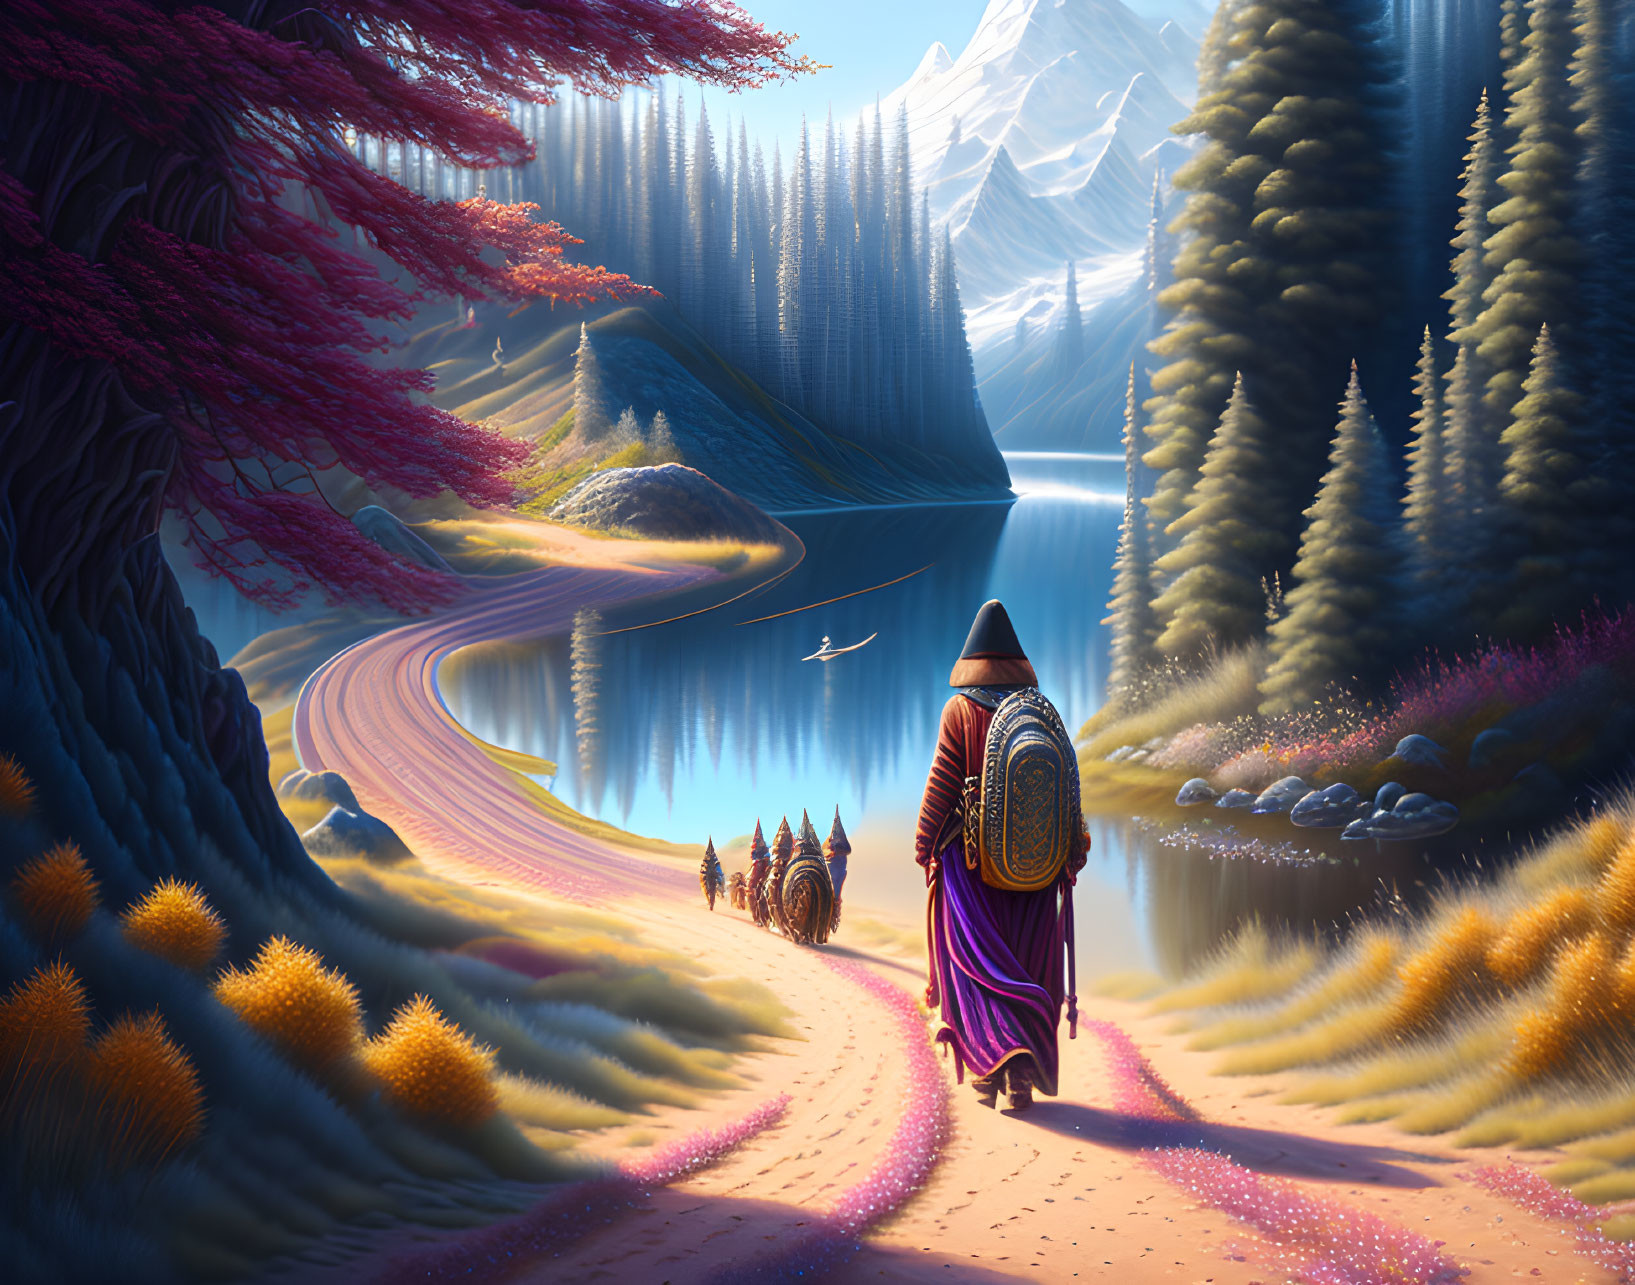 Cloaked figure walking by tranquil lake, colorful trees, mountains, and caravan under serene sky